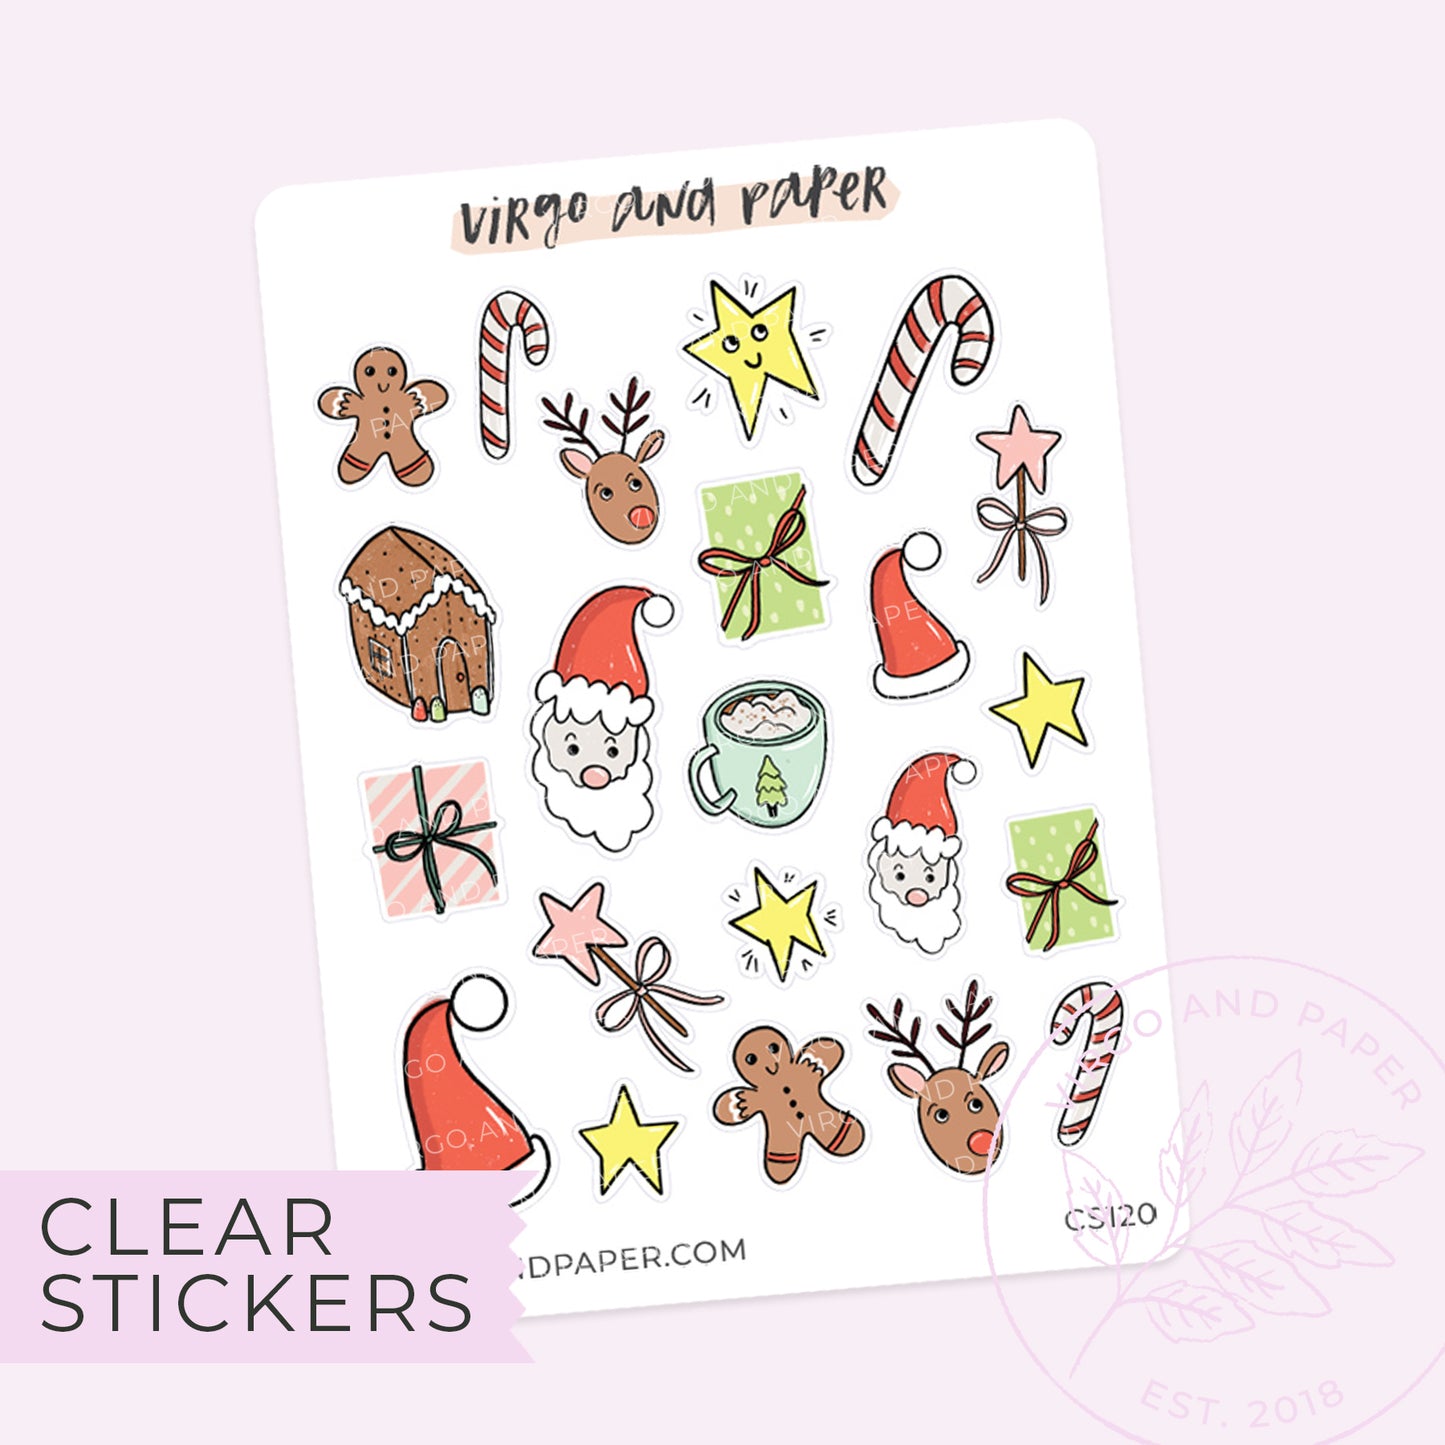 Clear Classic Smiley Face Stickers – Virgo and Paper